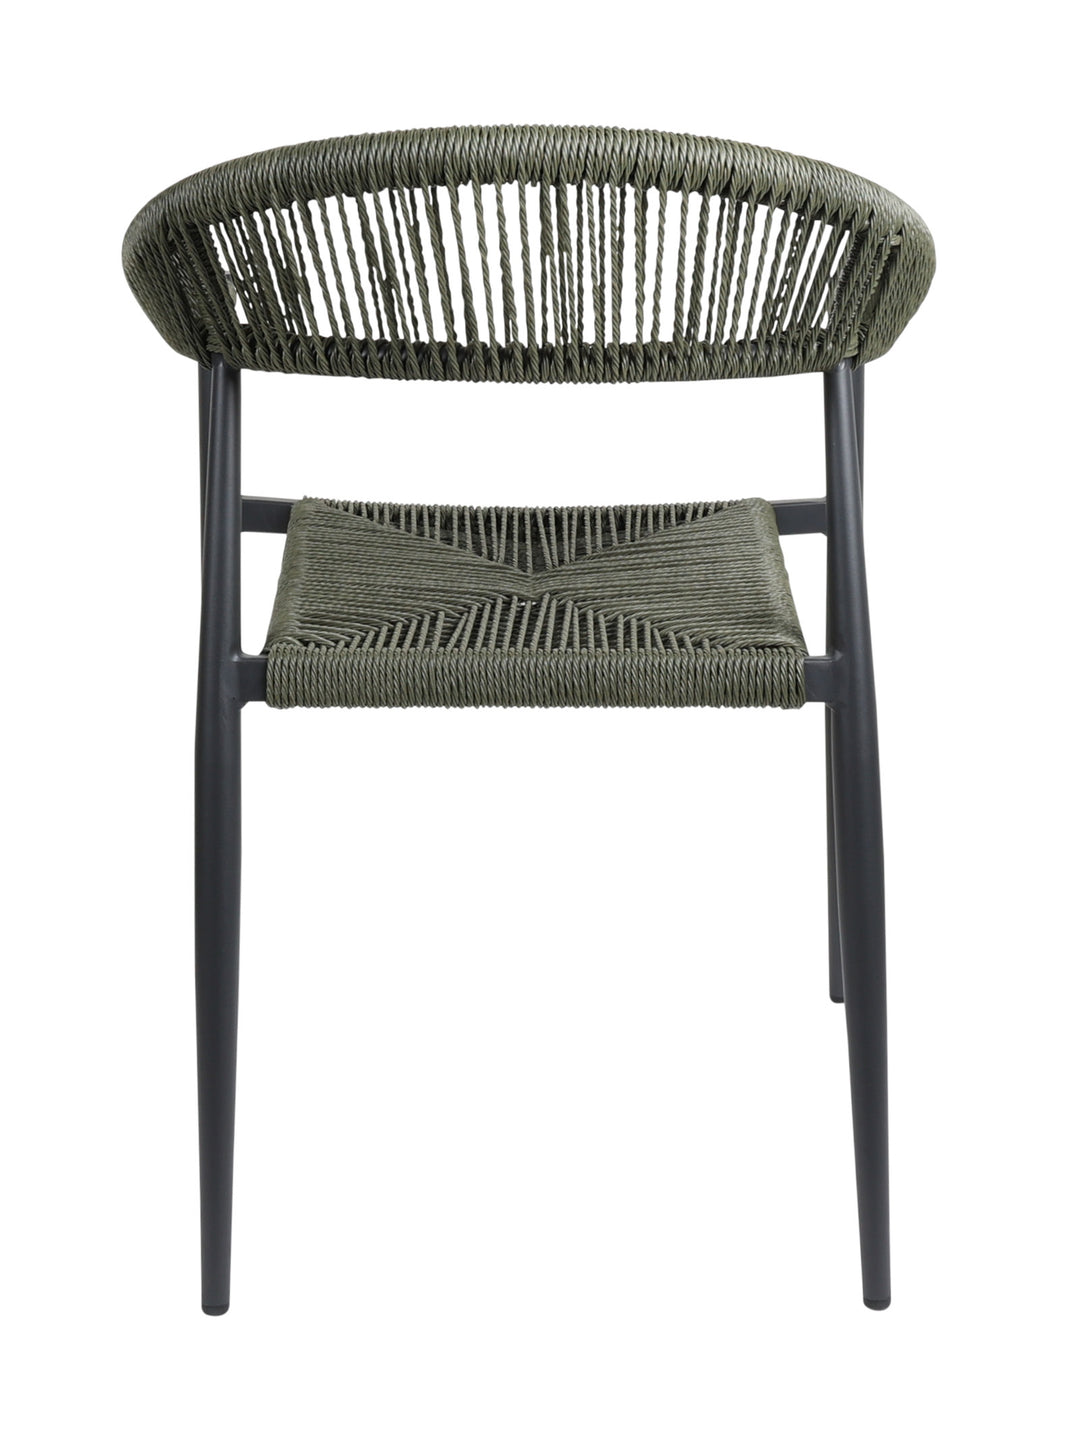 Zion Stackable Outdoor Chair